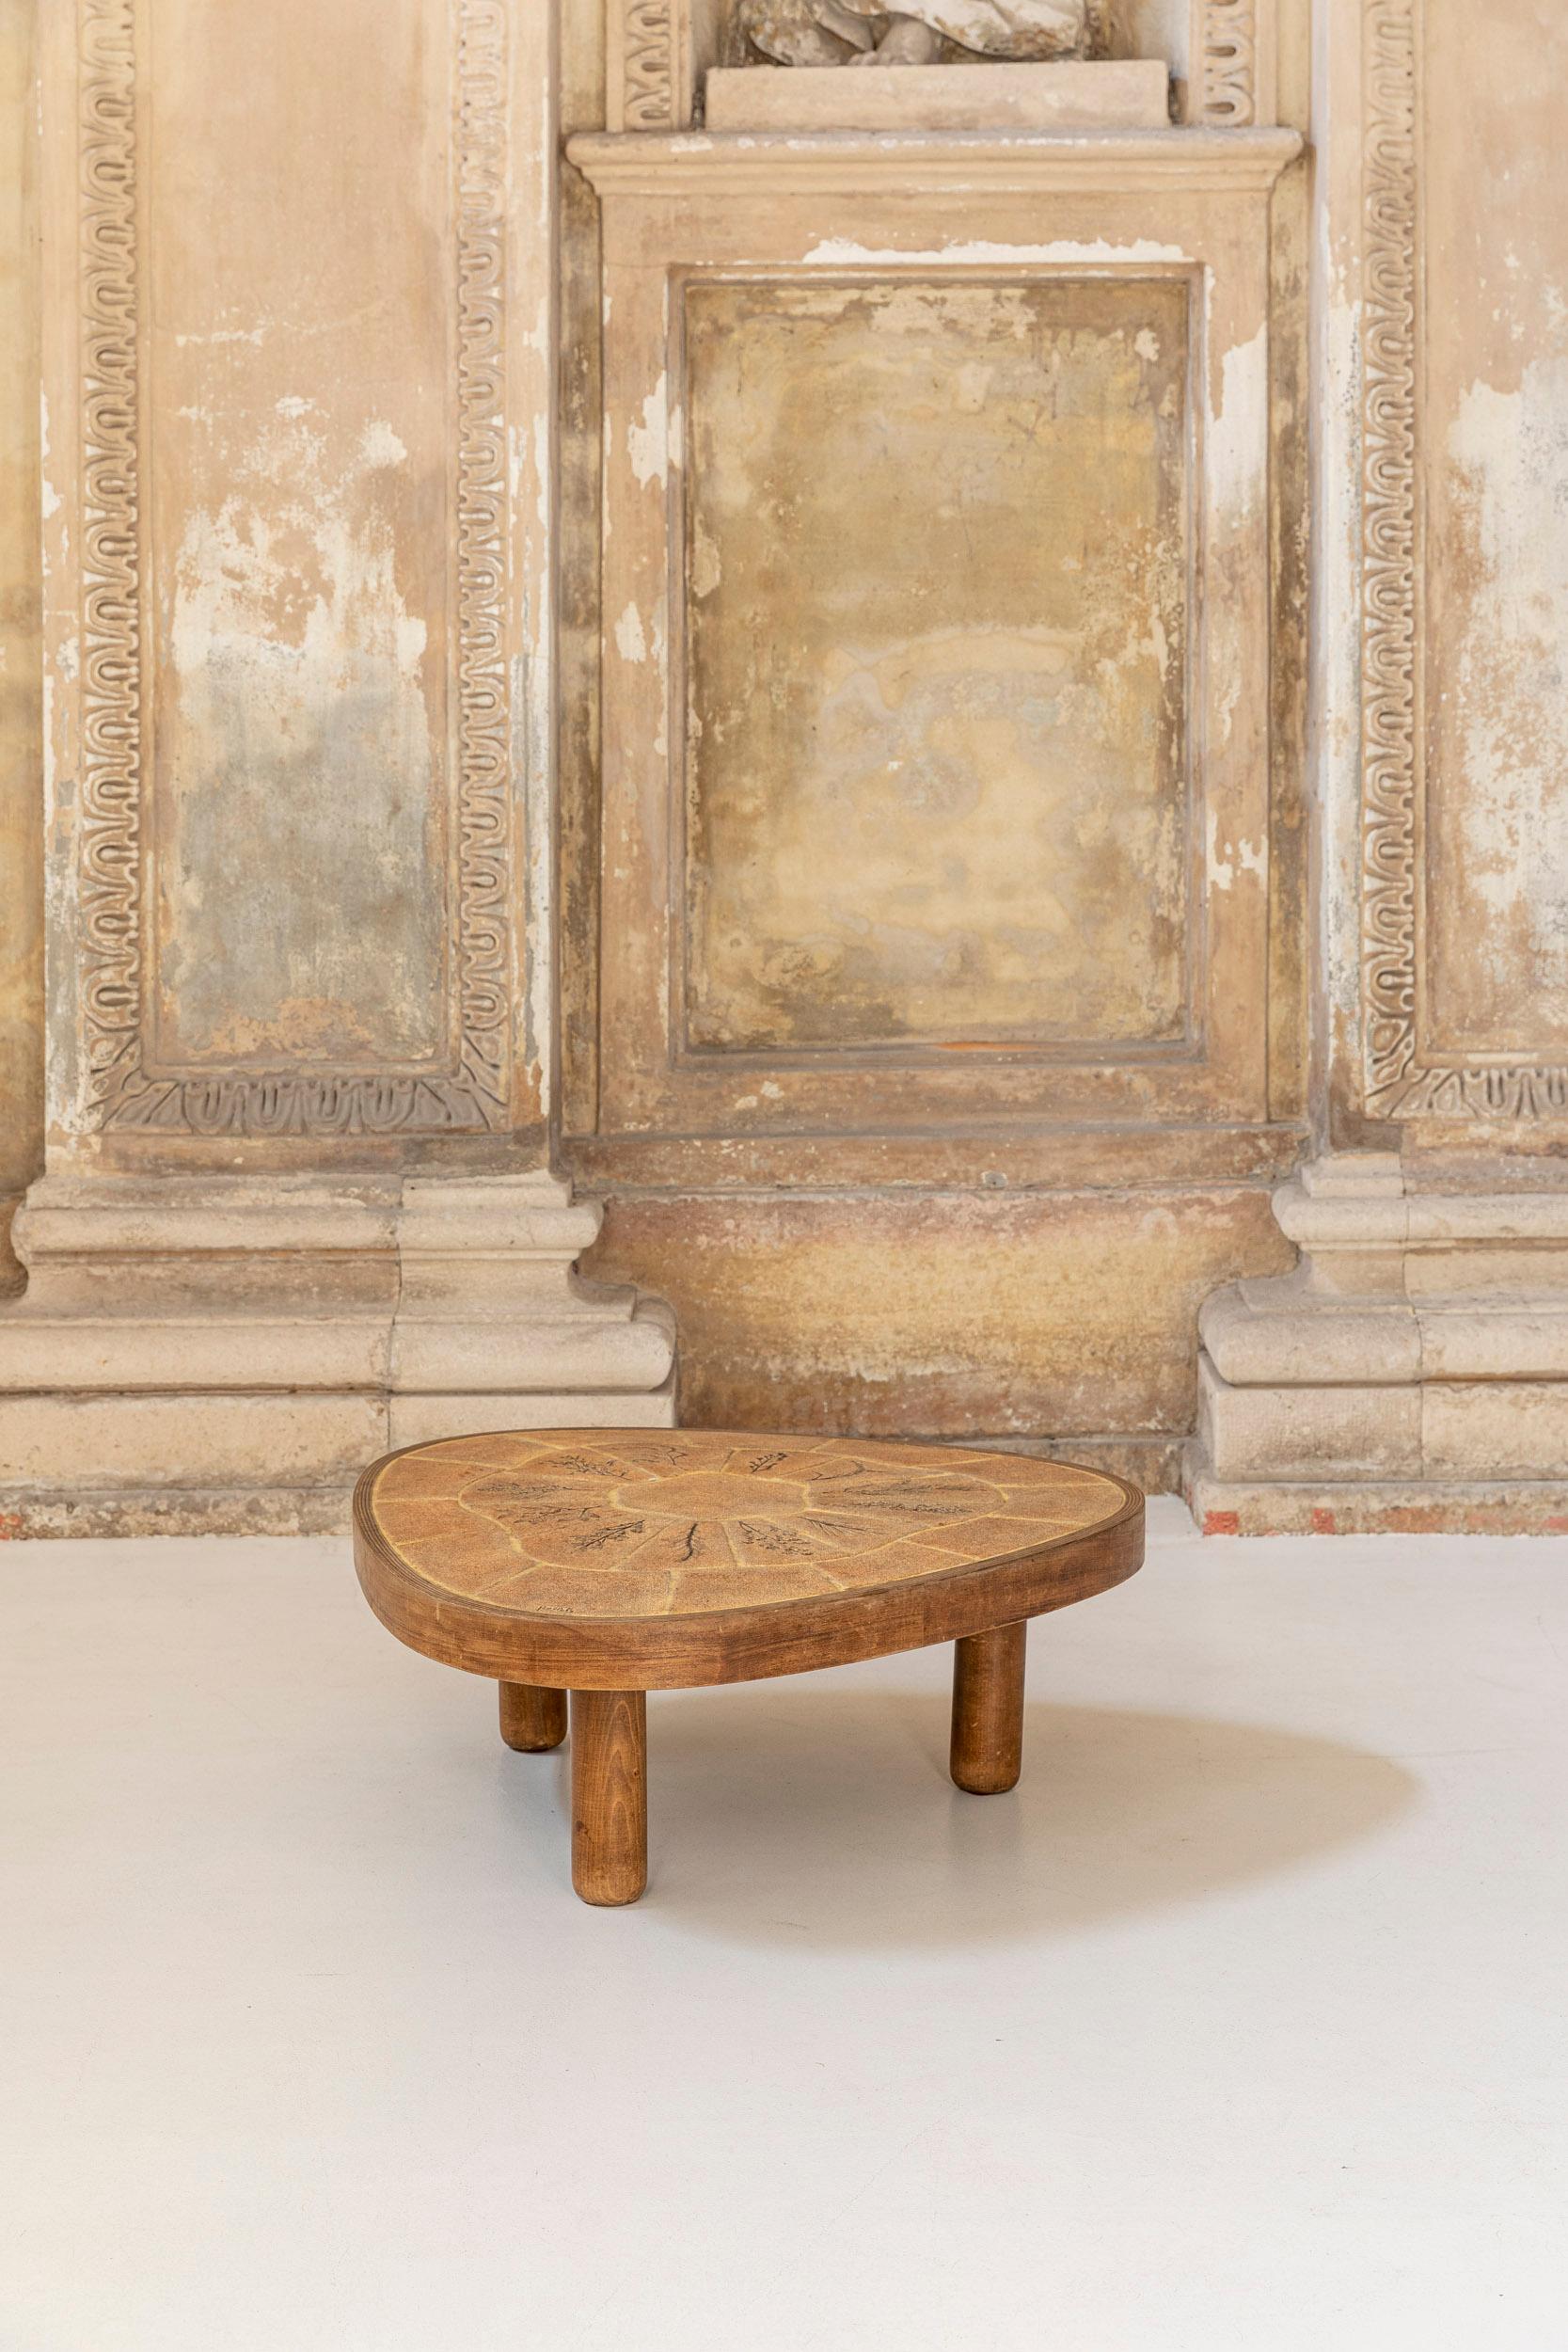 A coffee table designed by the French ceramist Barrois with a bend wood frame and a tile top finely decorated in a triangular shape, mounted on three turned legs.